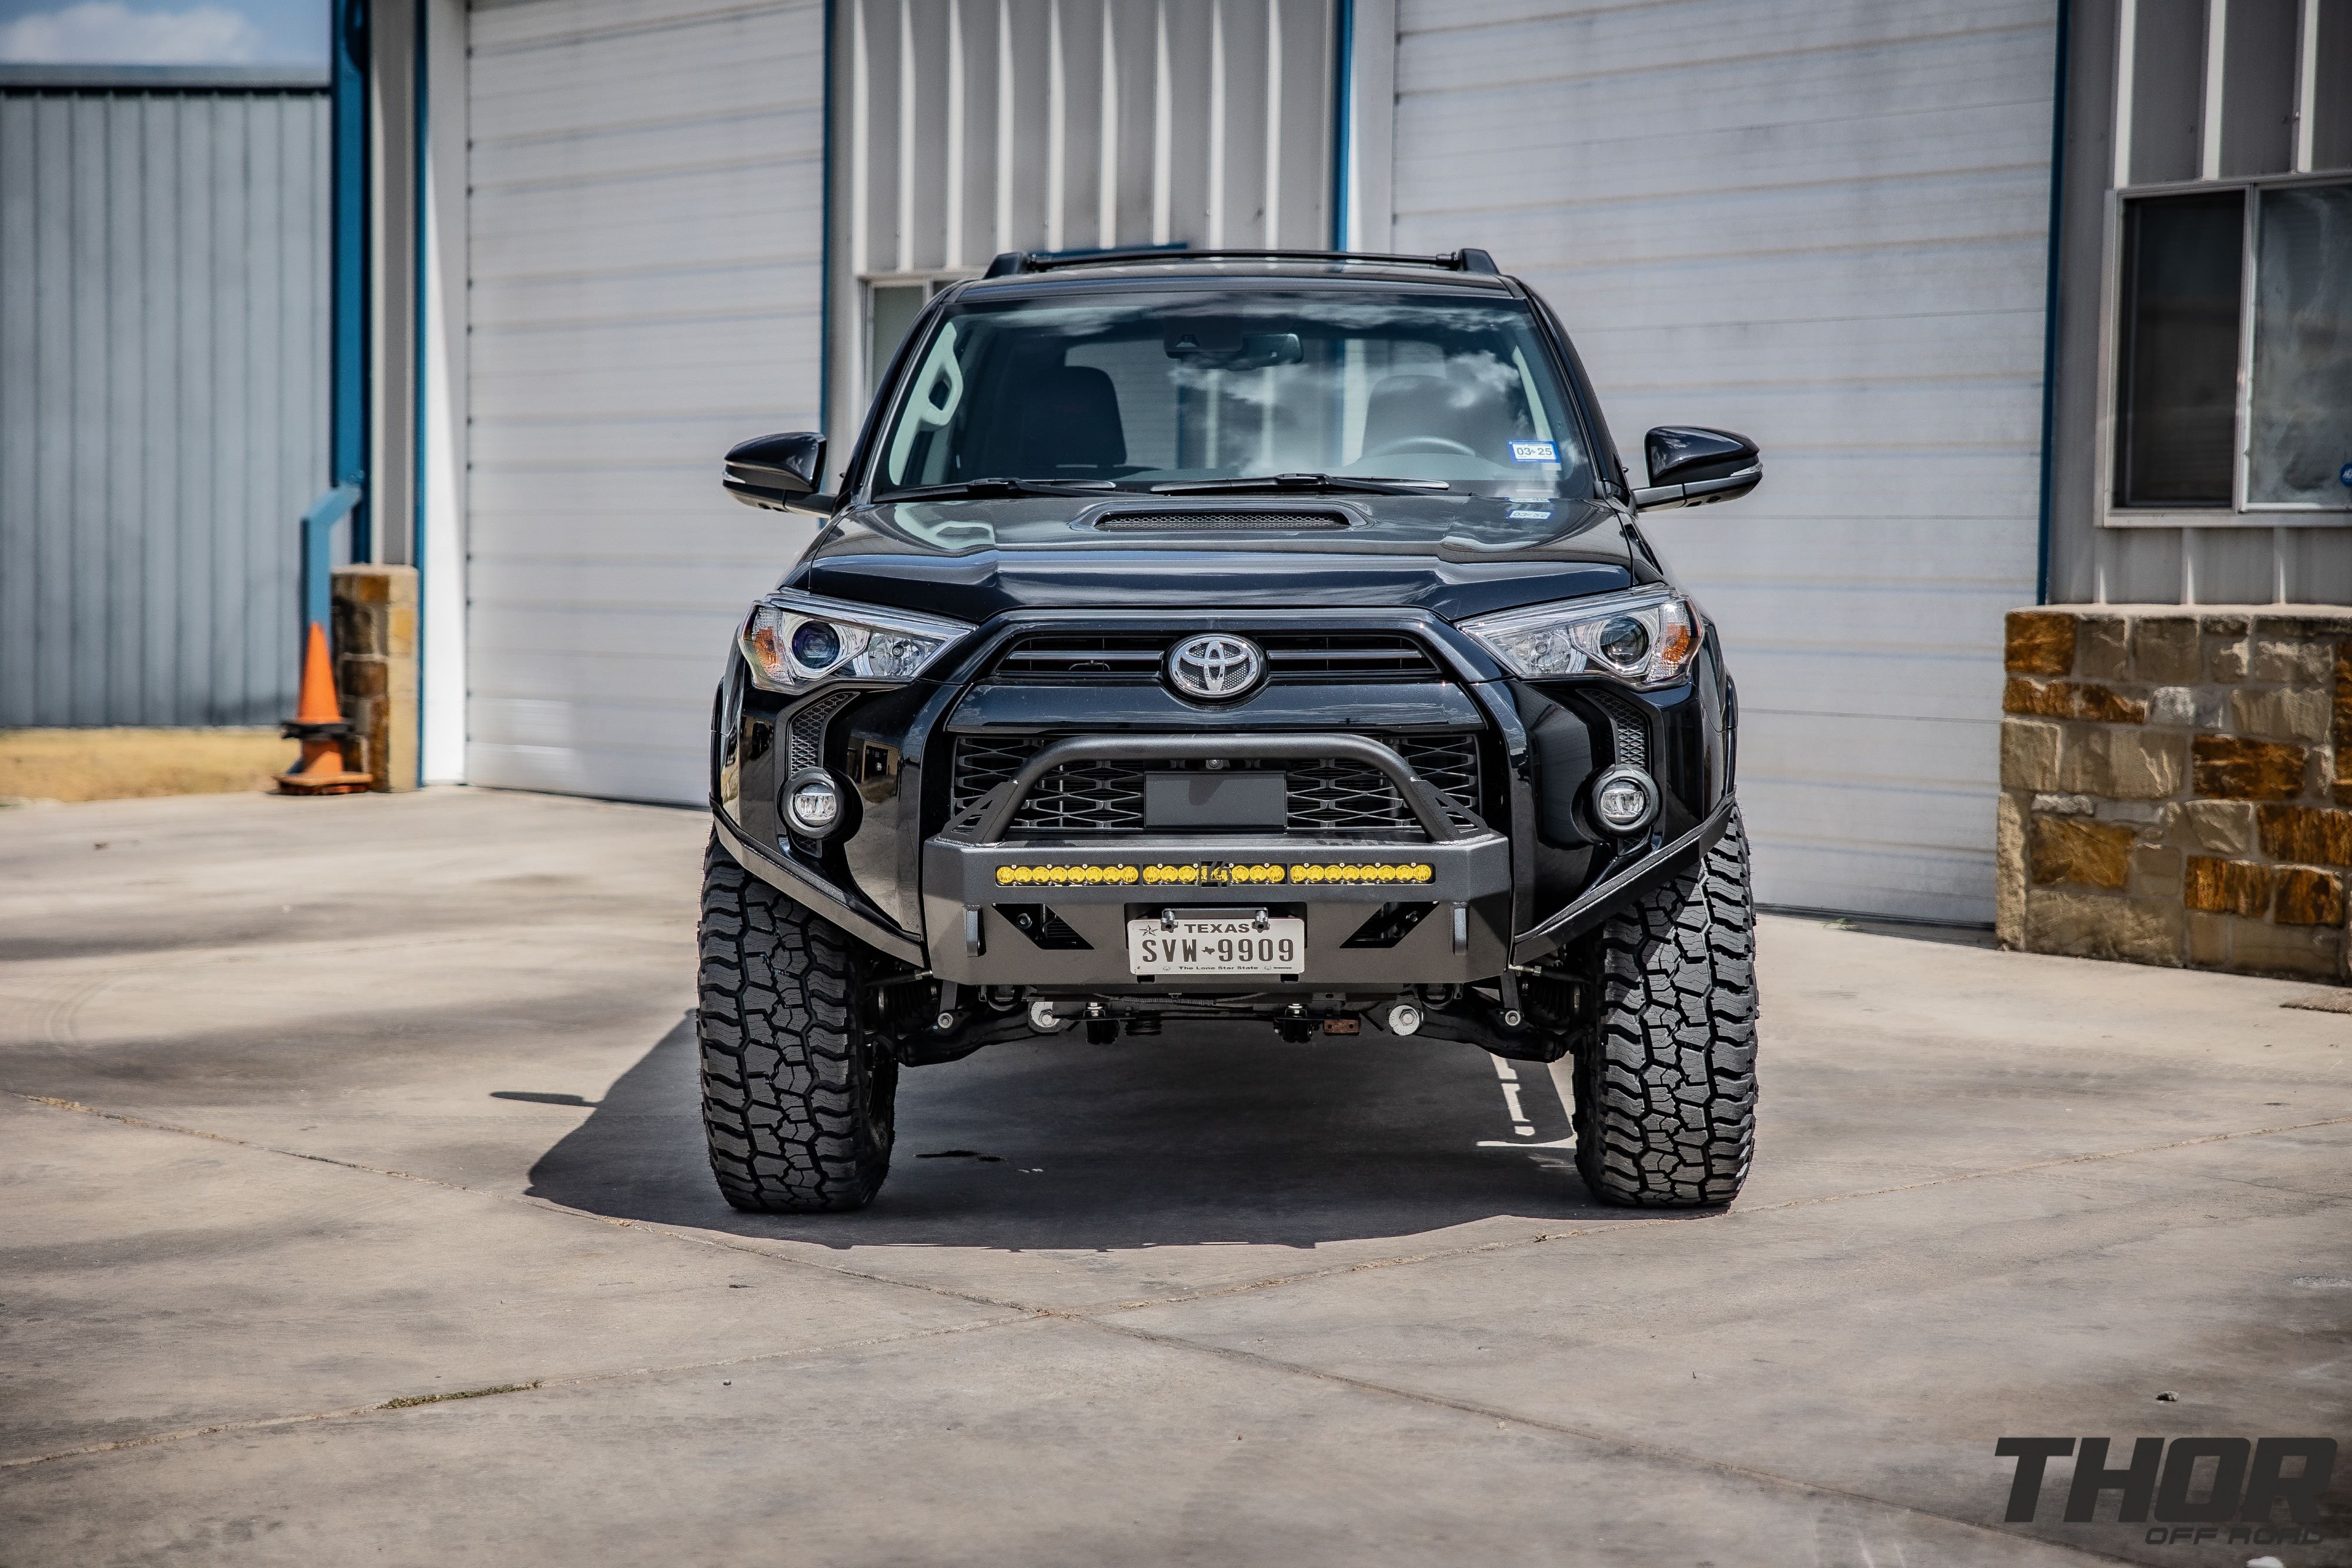 2020 Toyota 4Runner TRD Off-Road in Black with Icon 0-3.5" Stage 5 Suspension System with Tubular UCA, 17x9" Fuel Zephyr Bronze Wheels, 295/70R17 Baja Boss AT Tires, C4 Low Pro Bumper with Lighting, Borla Catback Touring Exhaust